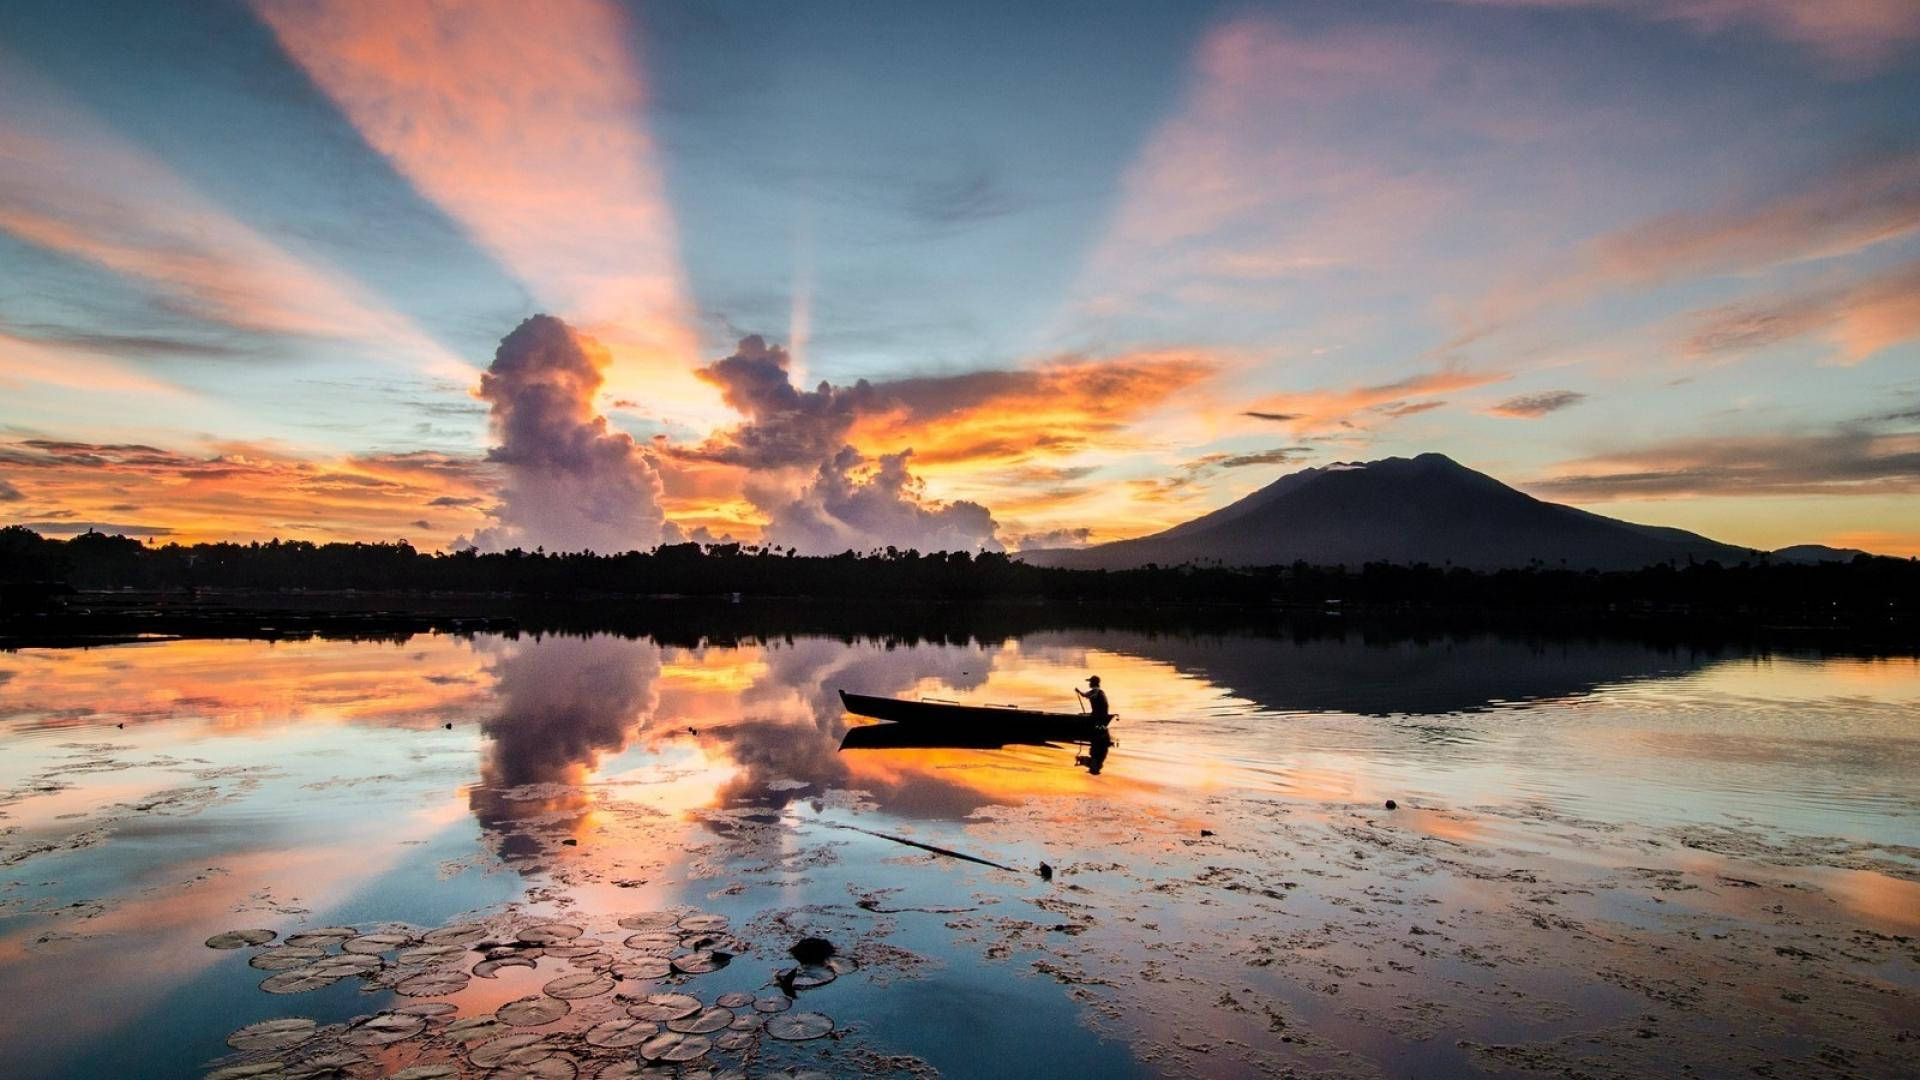 Philippines Lake In The Rising Sun